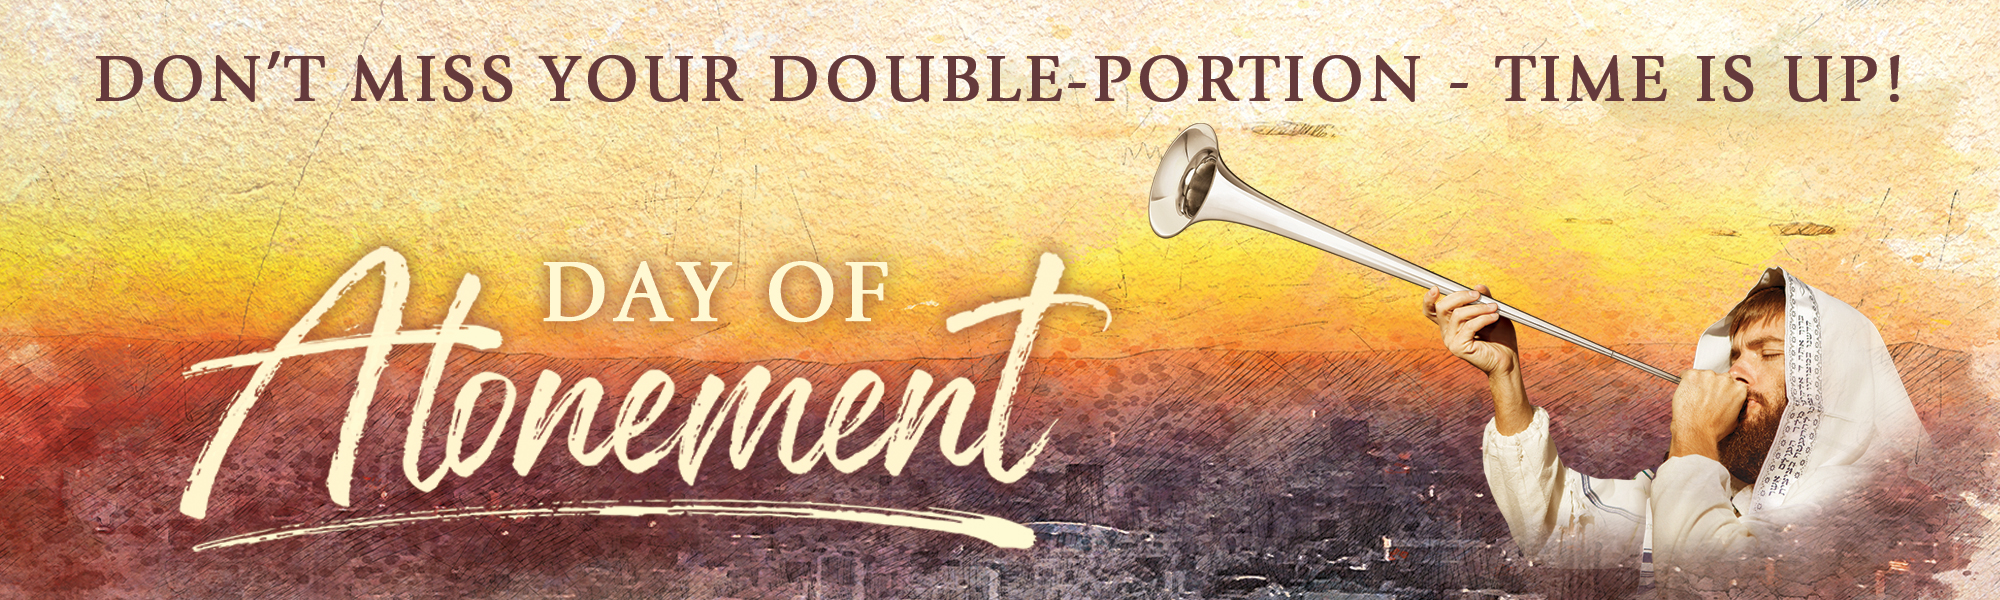 The Day of Atonement: God's Holiest Day of the Year! A Double-Portion Blessing!